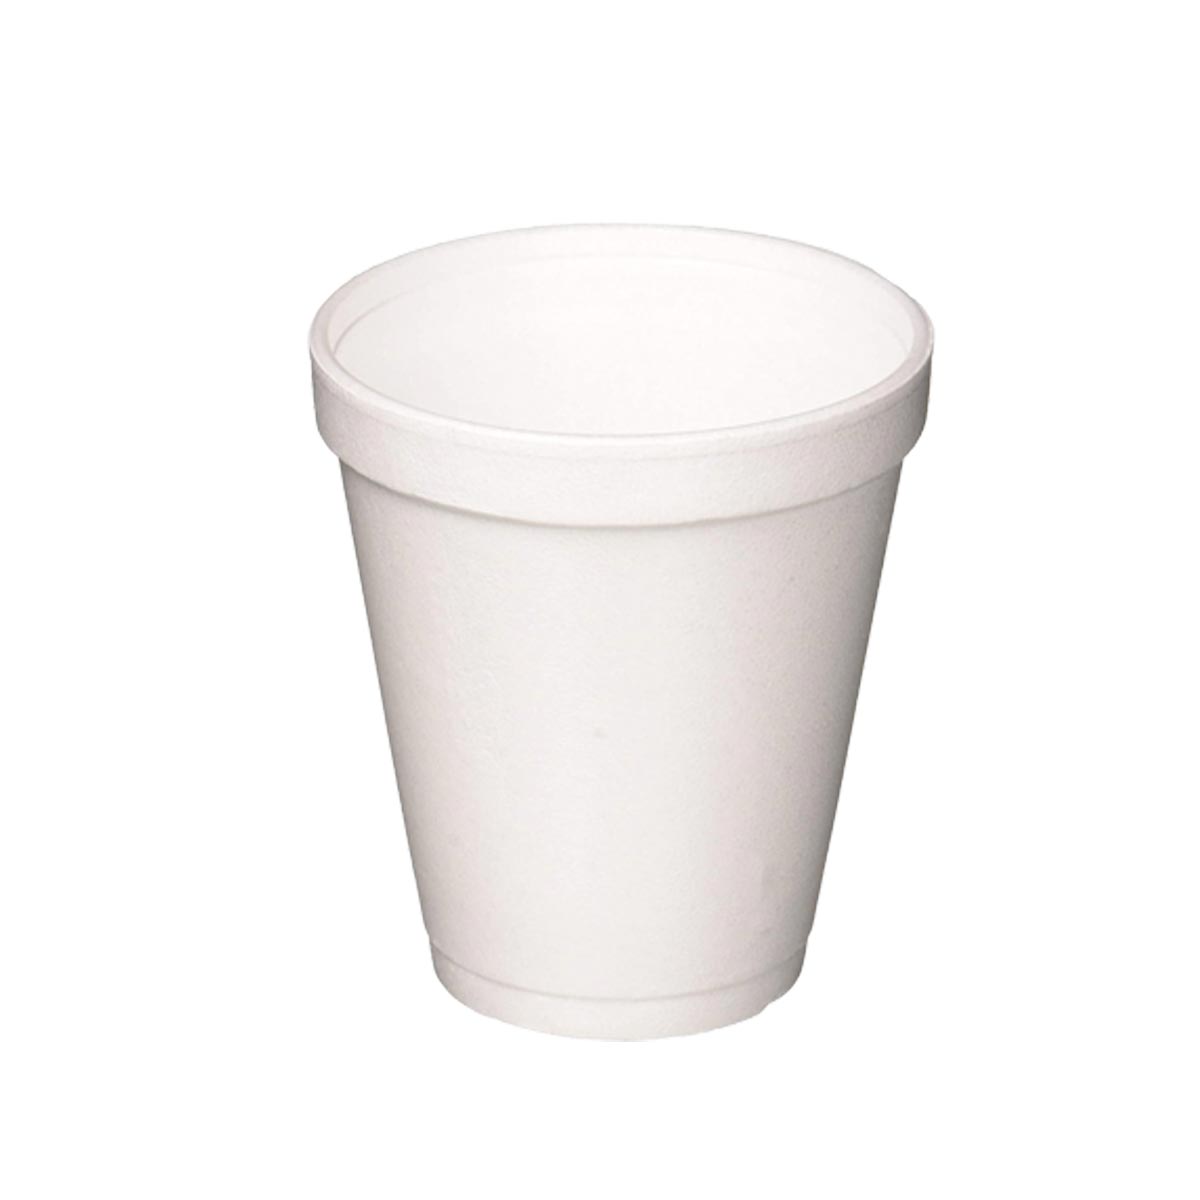 Katermaster Cup Foam White 237ml